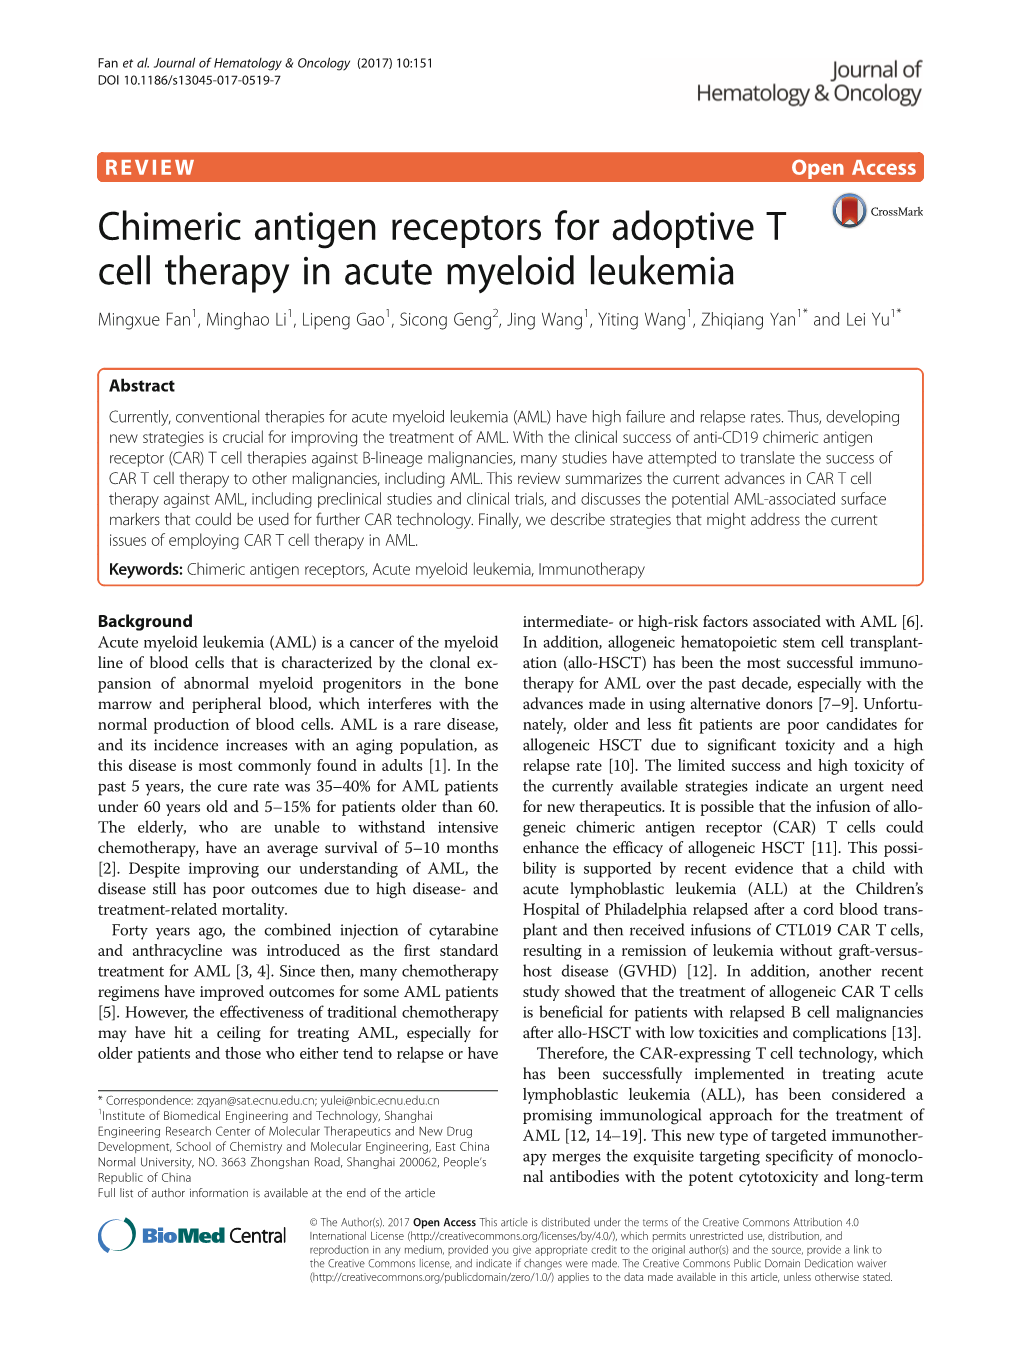 Chimeric Antigen Receptors for Adoptive T Cell Therapy in Acute